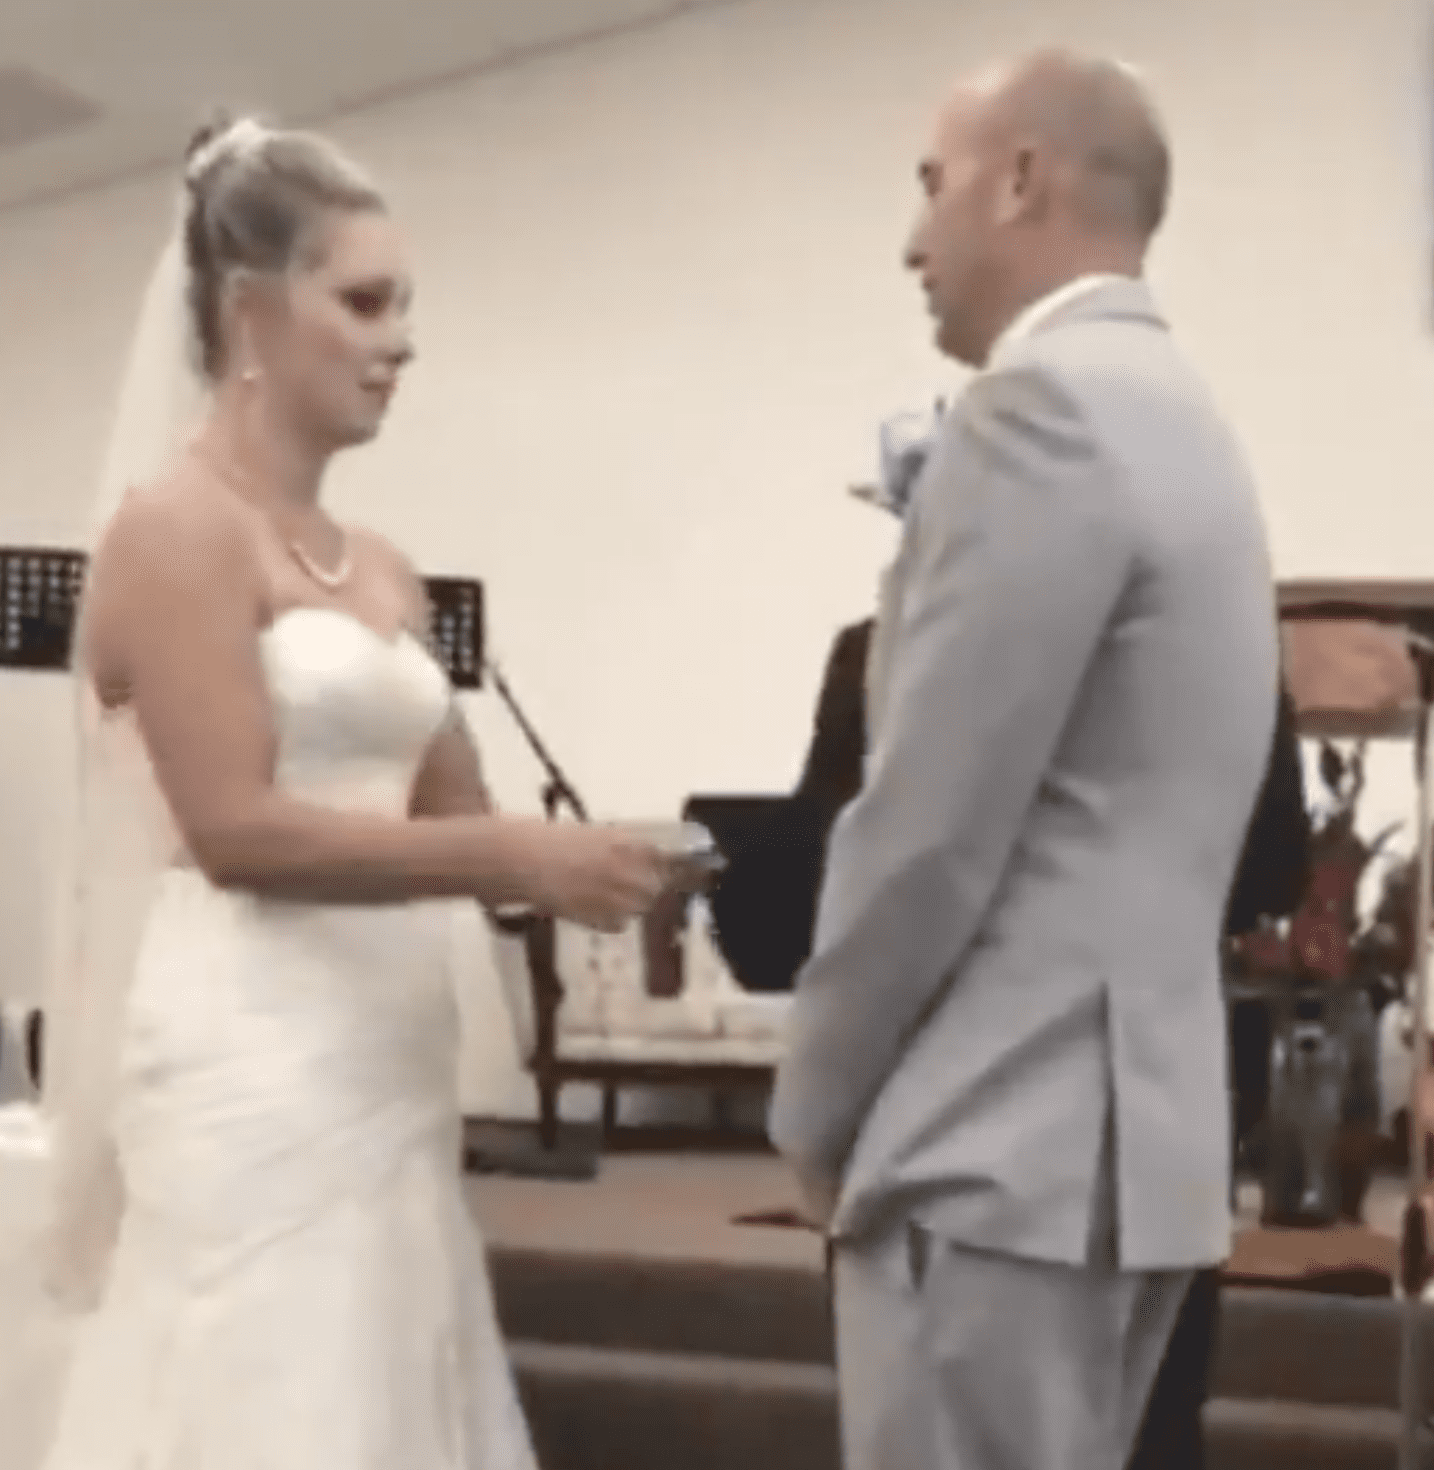 A bride and groom say their vows | Photo: youtube.com/JP Today News 